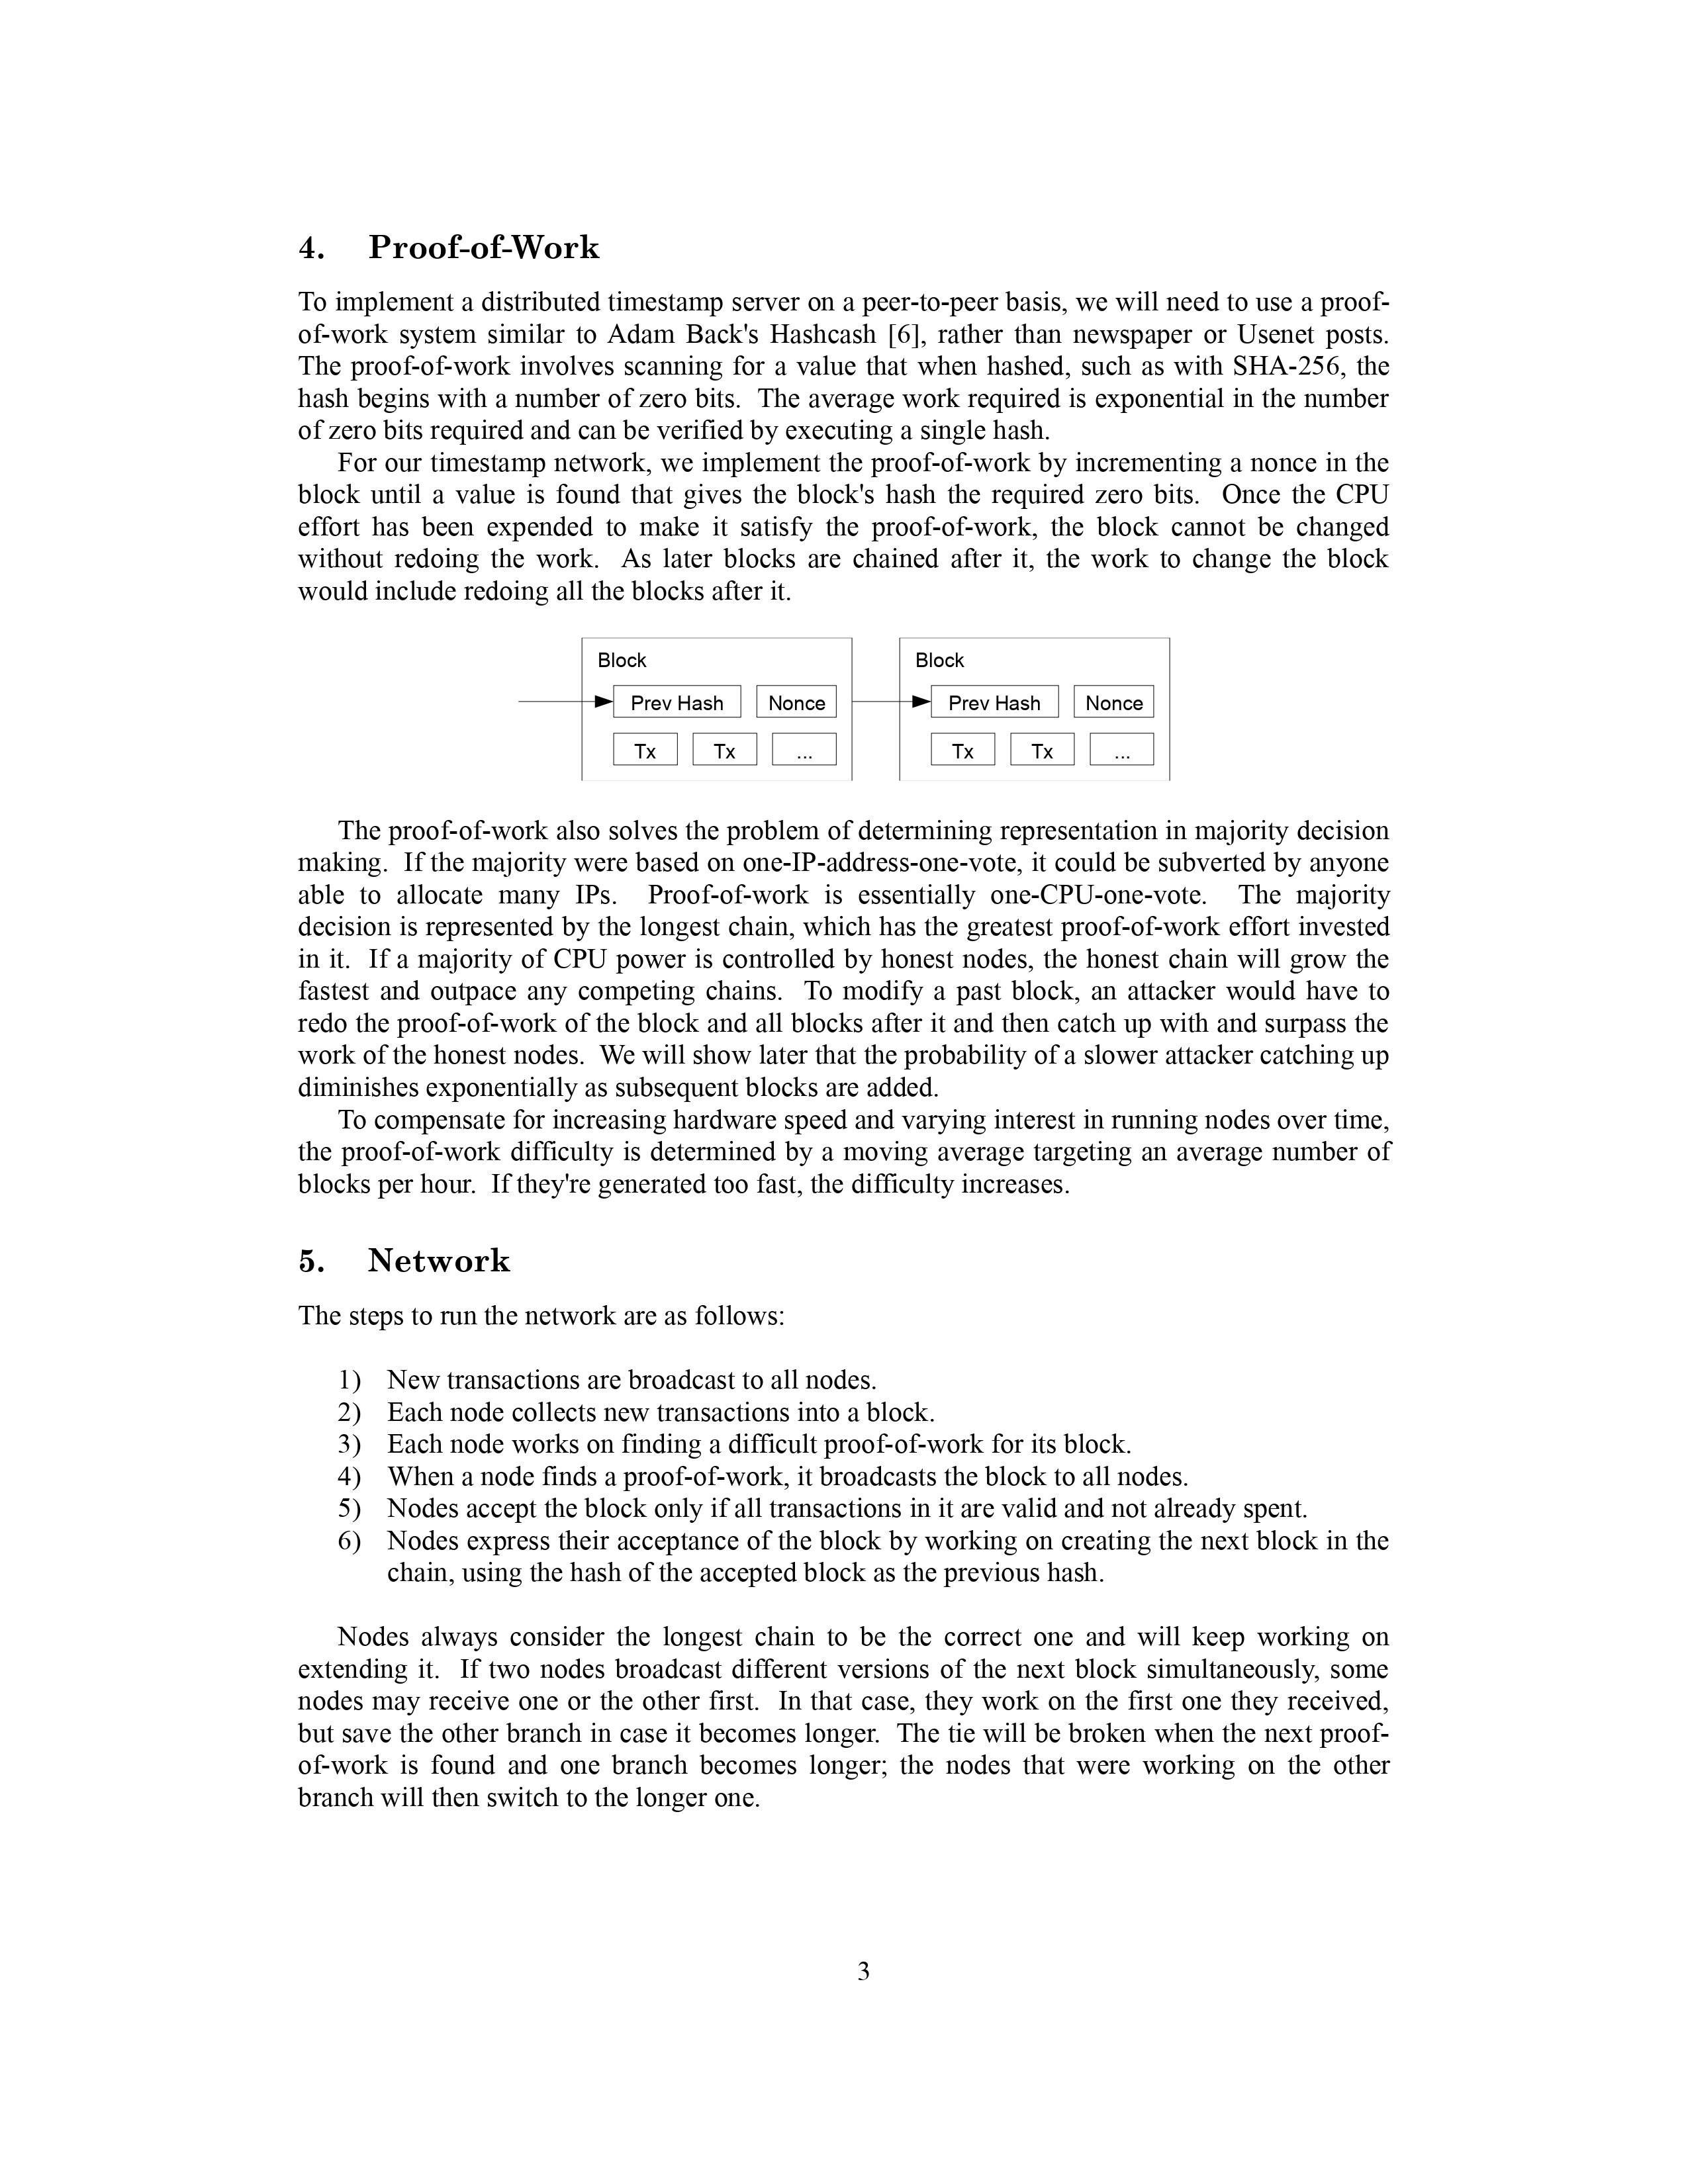 Bitcoin Whitepaper Page 3